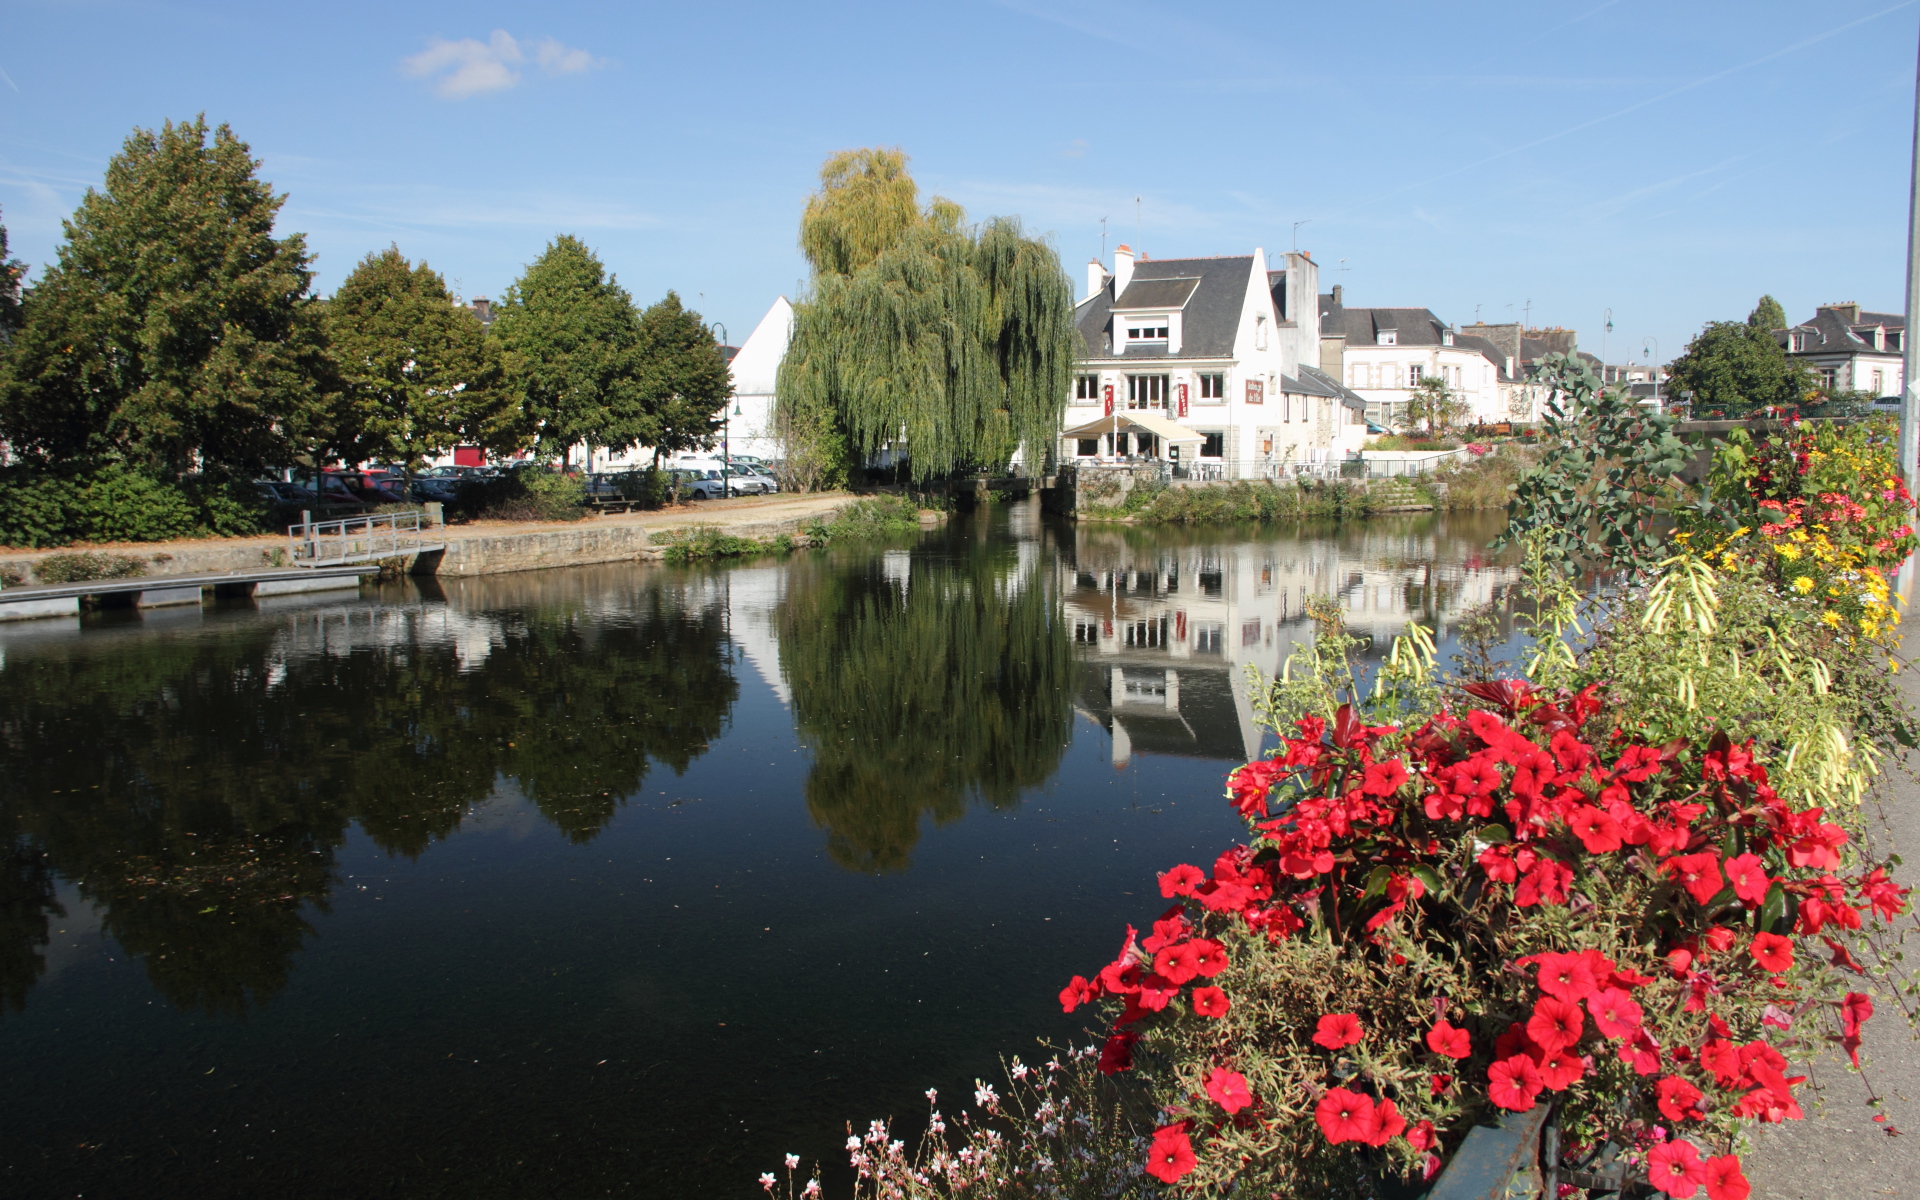 Lake in the town in Brittany, France